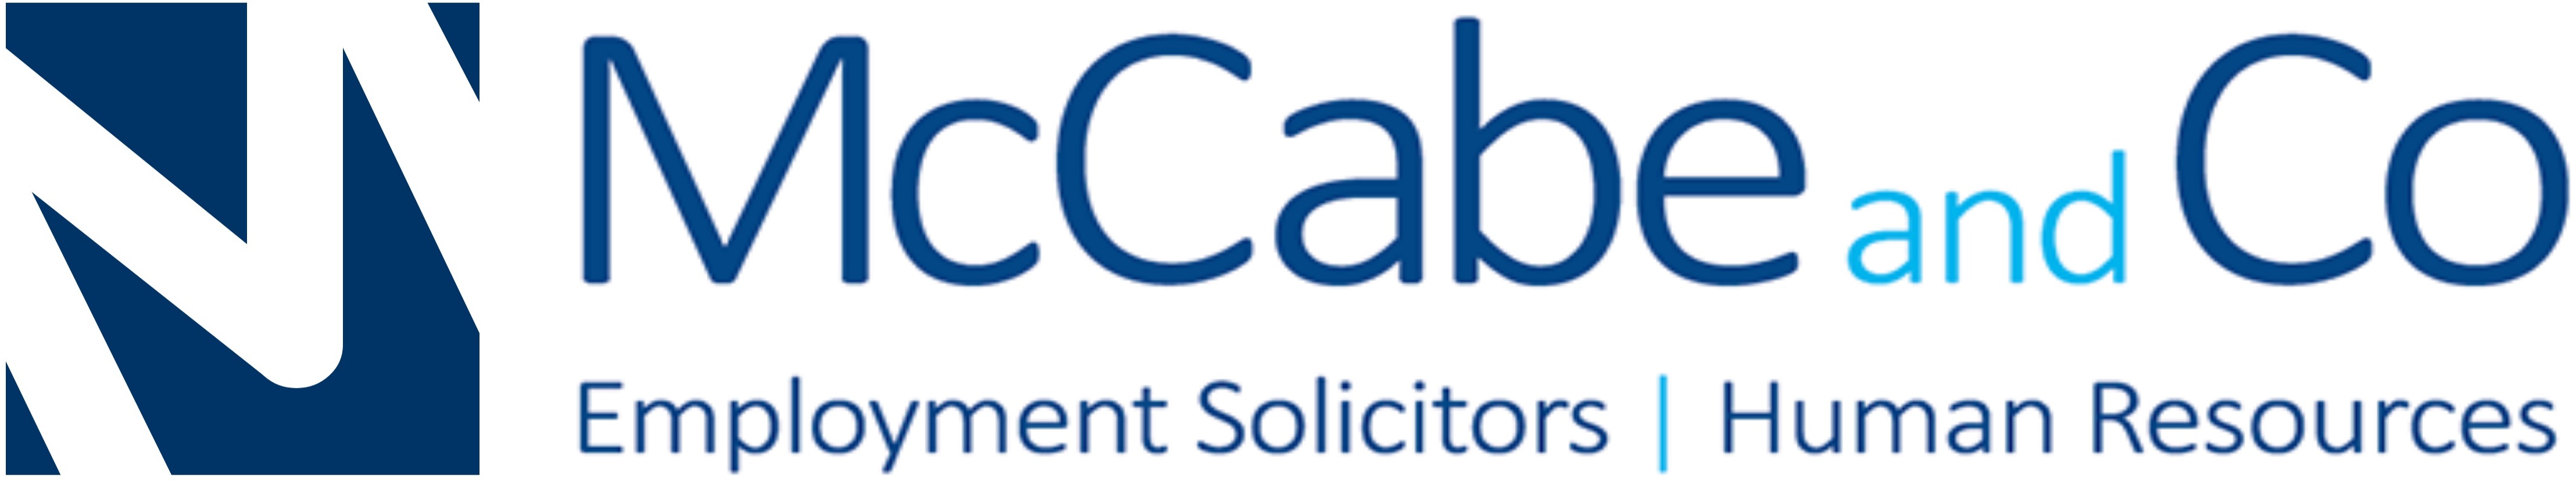 logo for McCabe and Co Solicitors